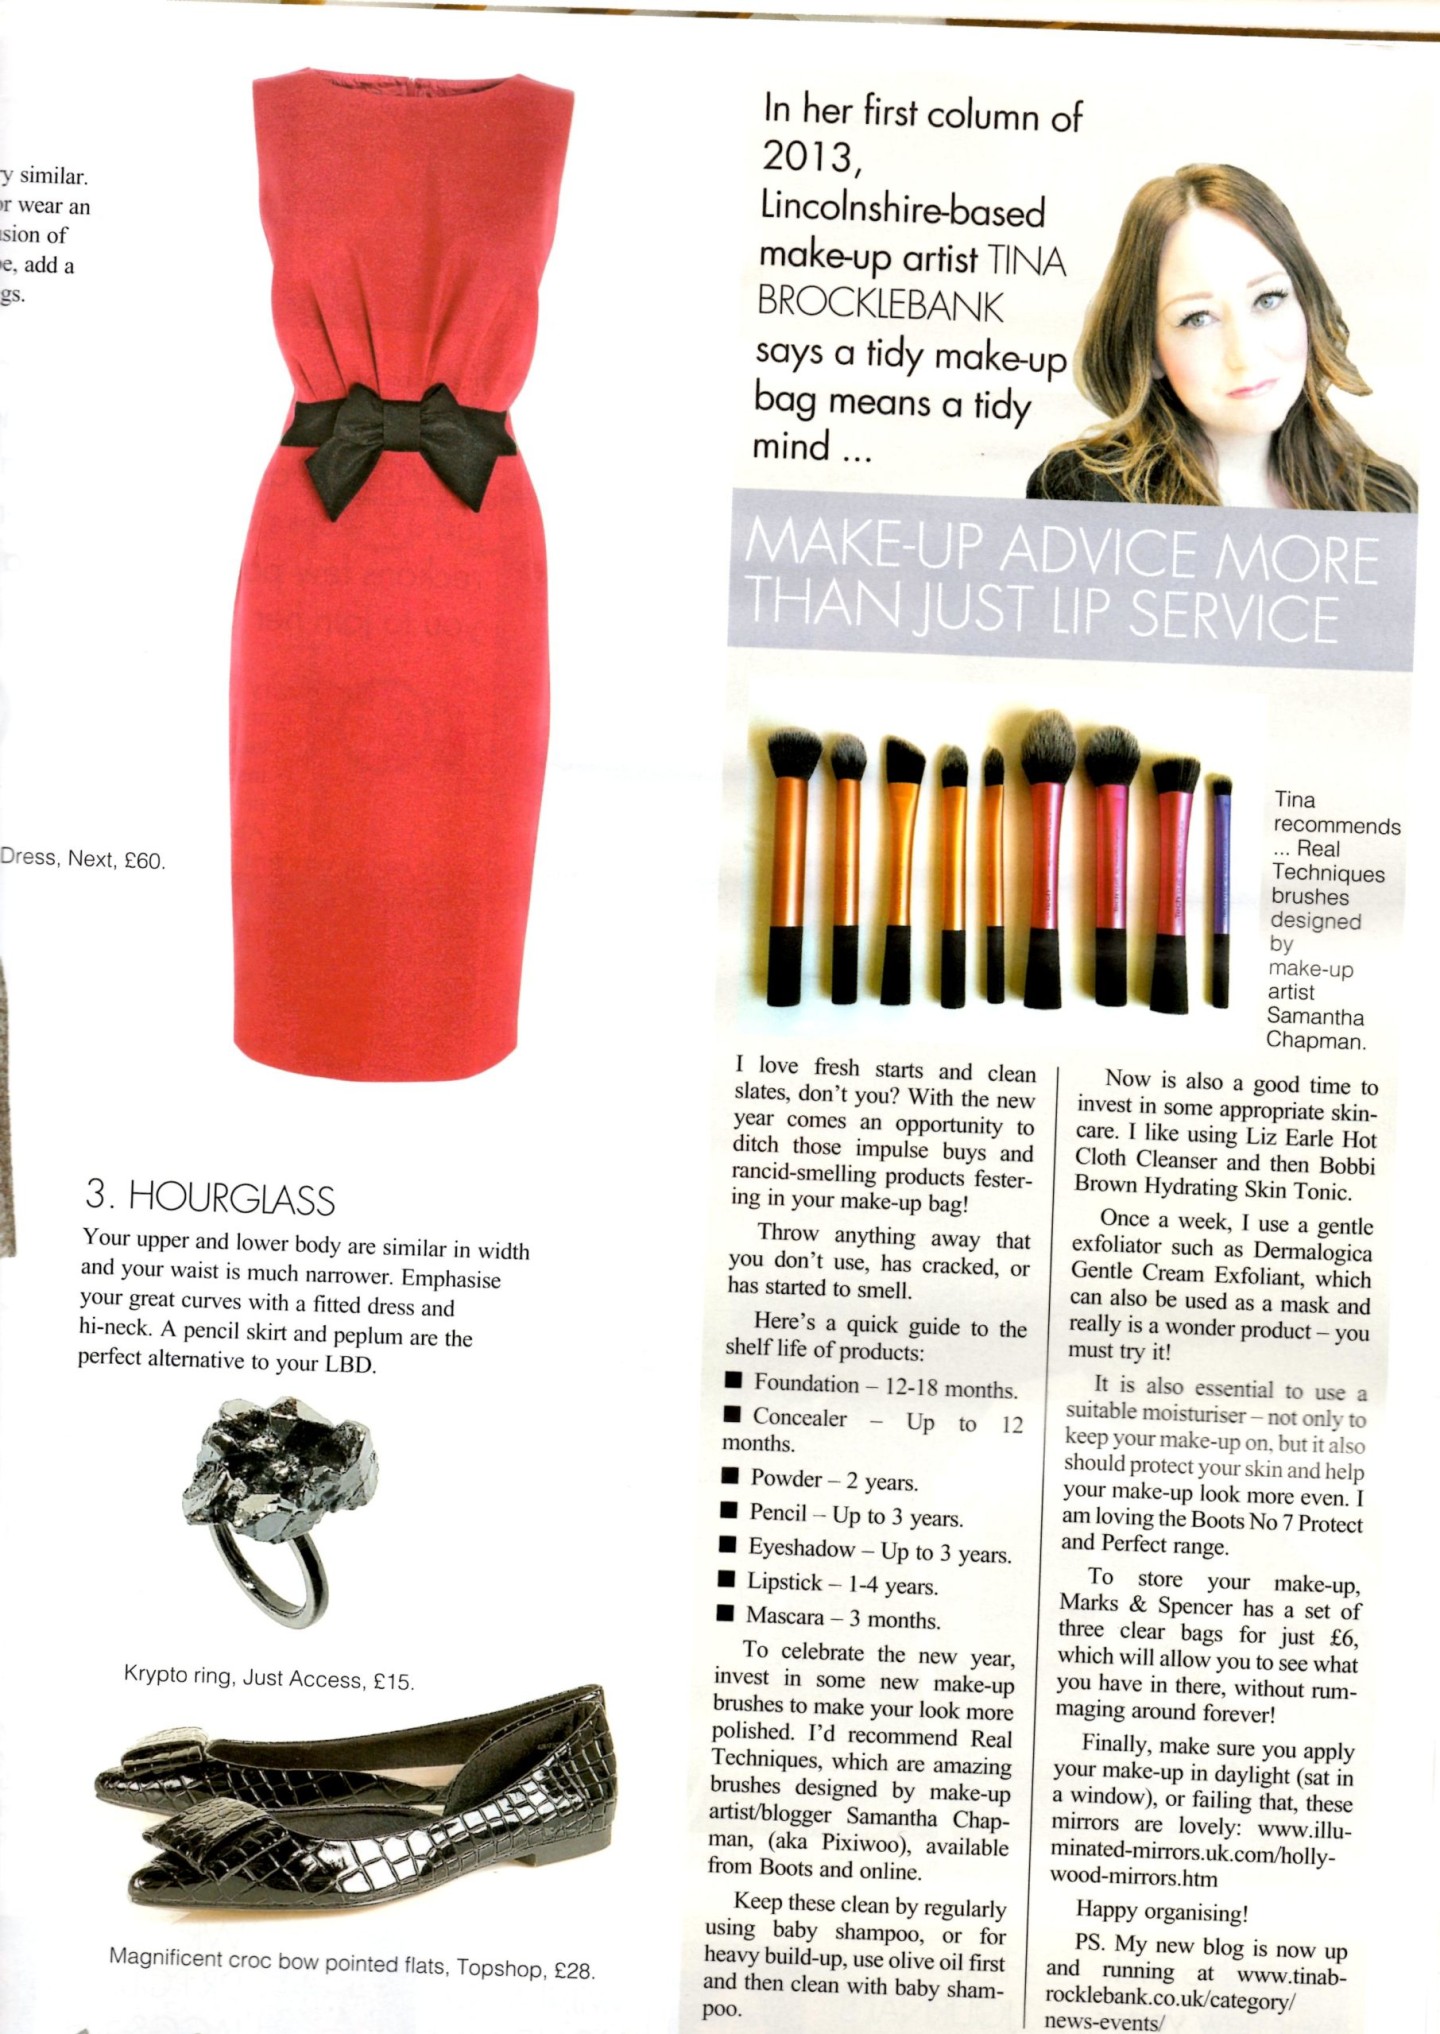 The Journal (January edition) - Article by Tina Brocklebank Make-up artist.